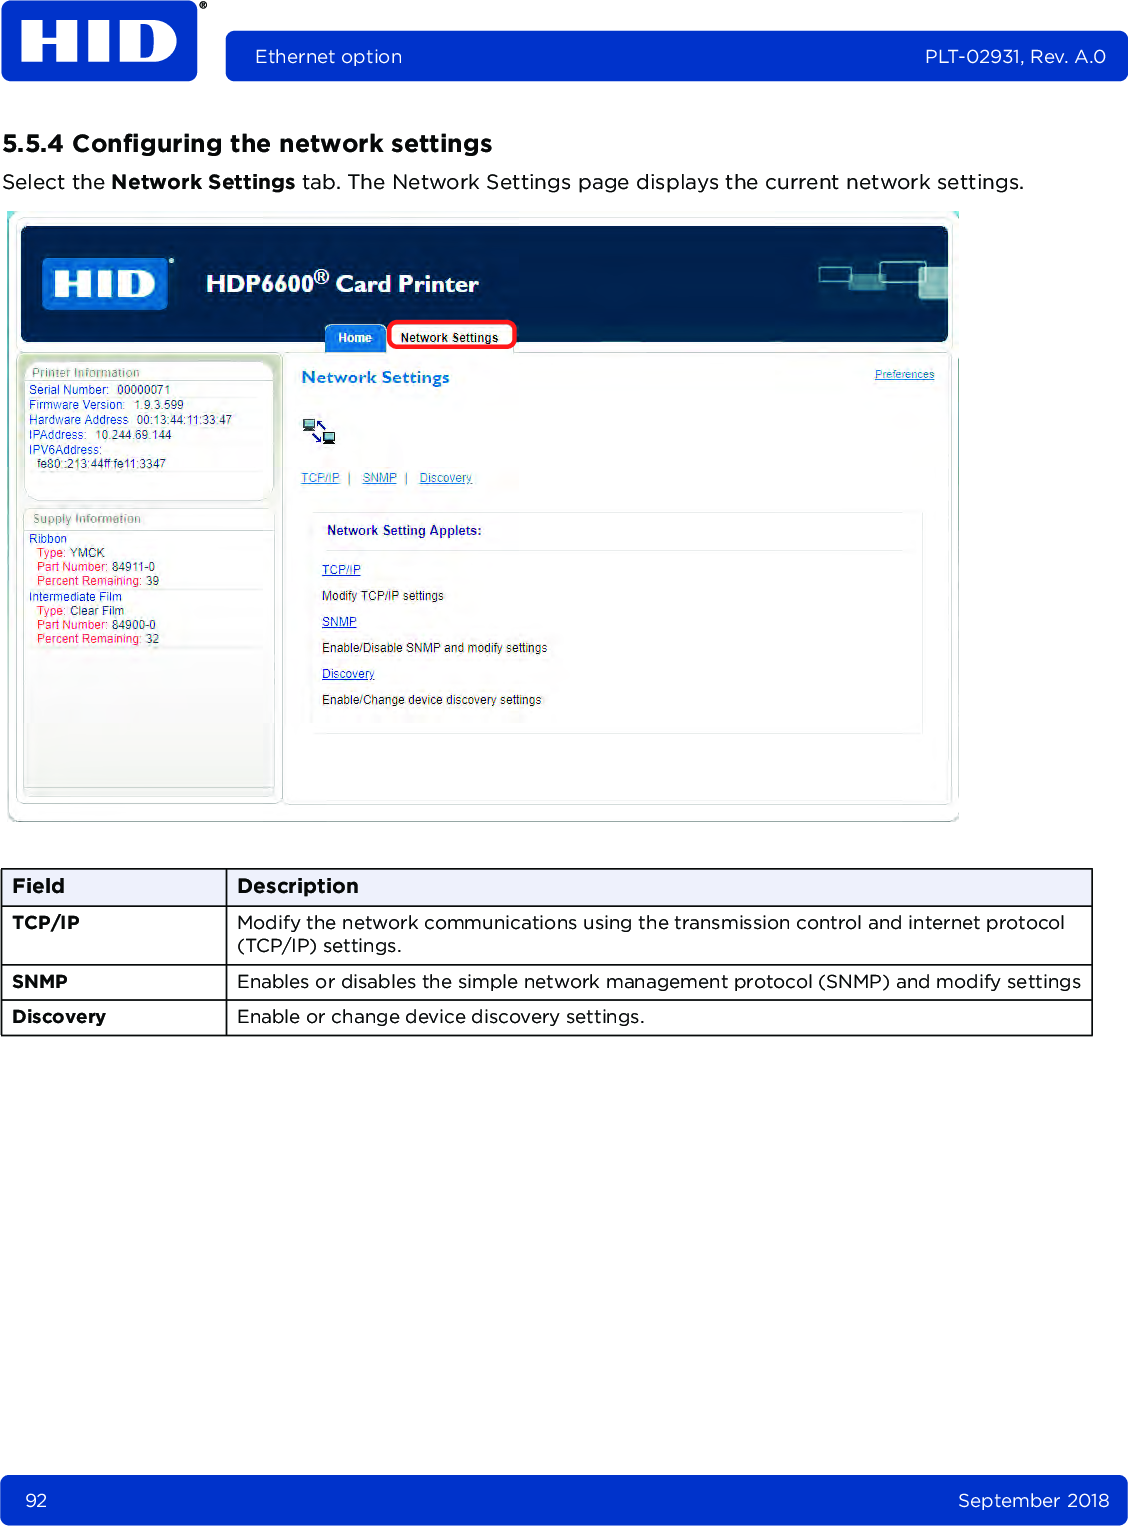 92 September 2018Ethernet option PLT-02931, Rev. A.05.5.4 Configuring the network settingsSelect the Network Settings tab. The Network Settings page displays the current network settings. Field DescriptionTCP/IP Modify the network communications using the transmission control and internet protocol (TCP/IP) settings.SNMP Enables or disables the simple network management protocol (SNMP) and modify settingsDiscovery Enable or change device discovery settings.